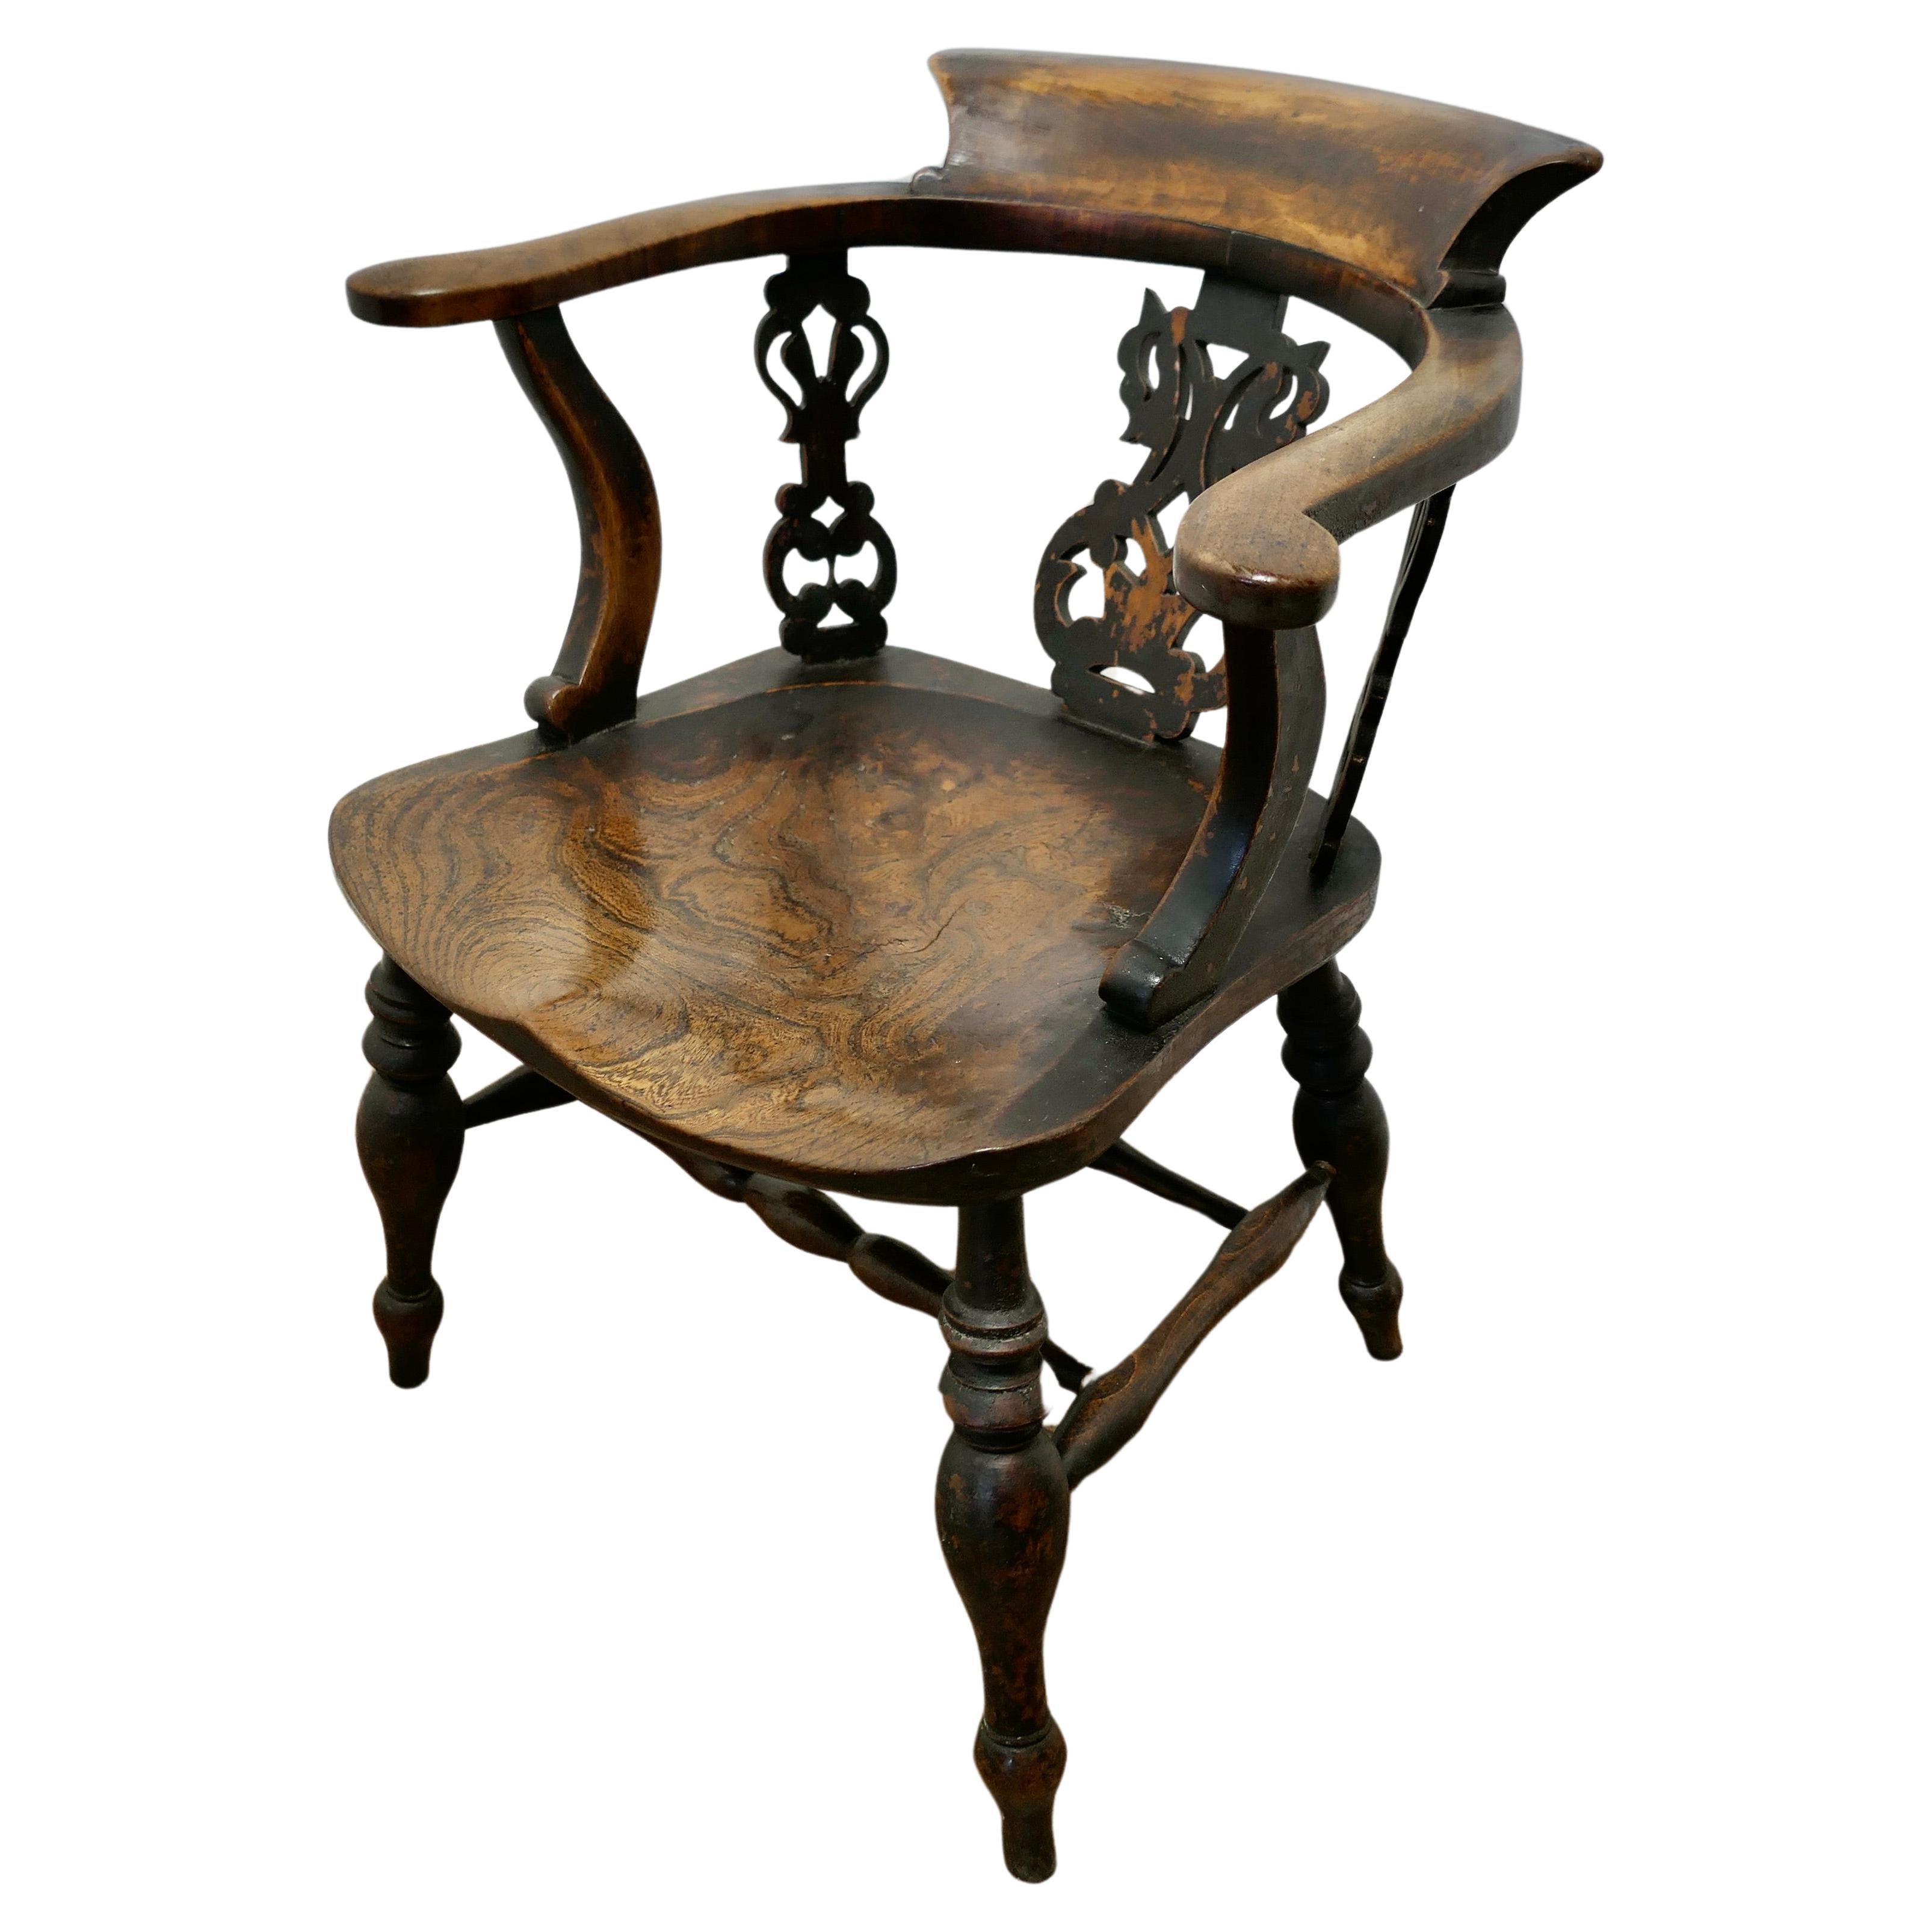 Fretwork Back Elm Windsor Desk Chair   This style is known by many names   For Sale